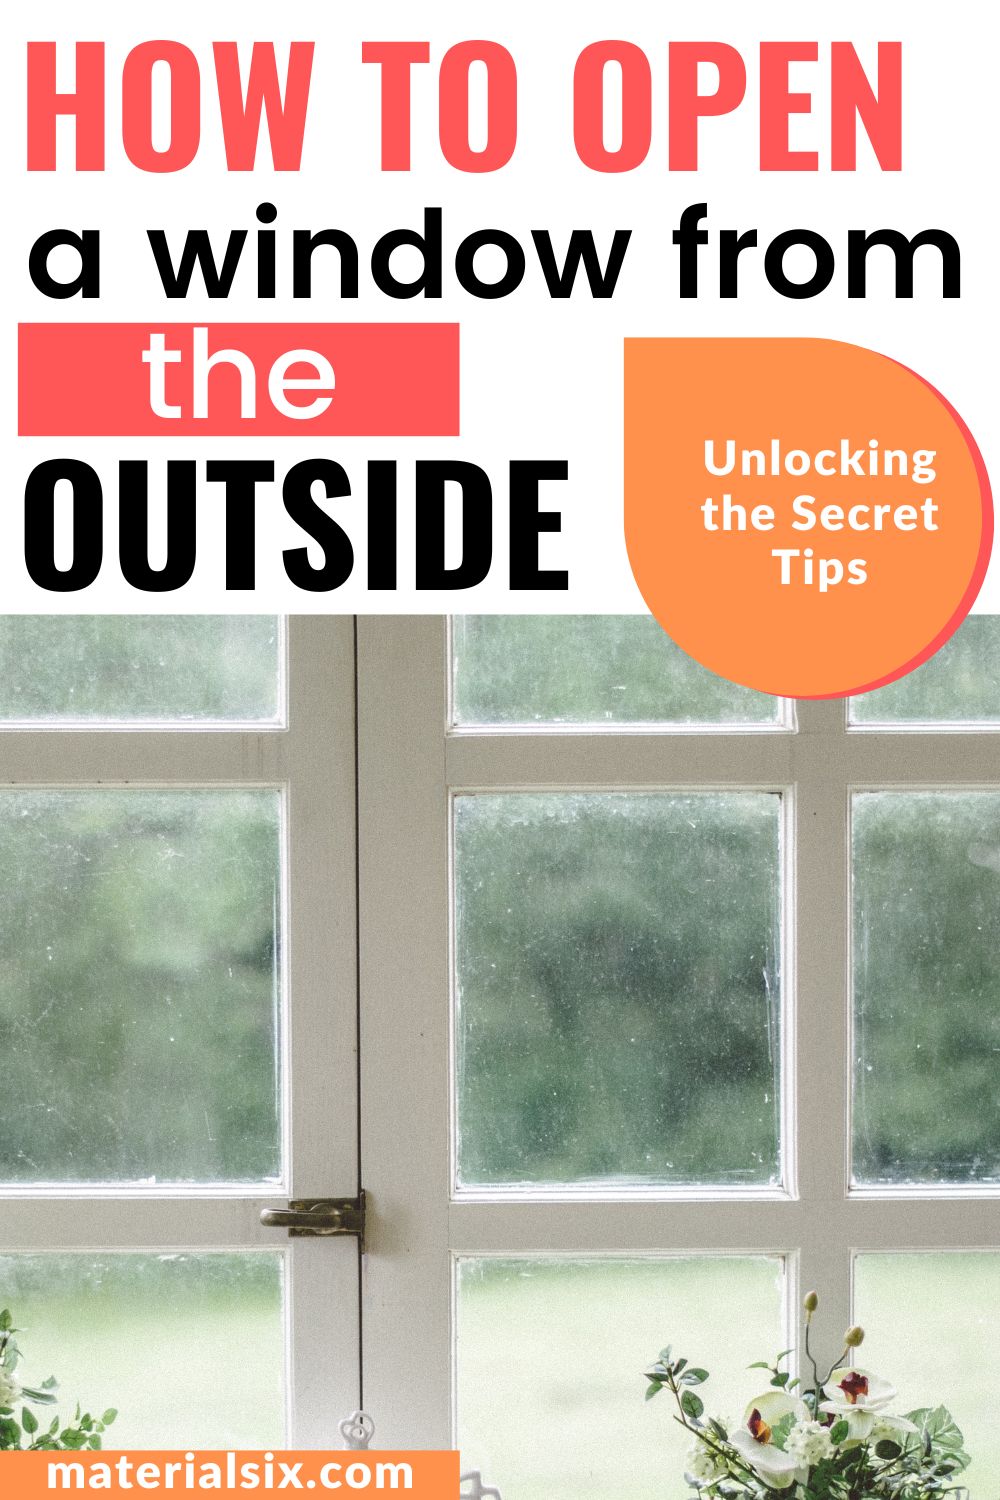 How to Open a Window from the Outside